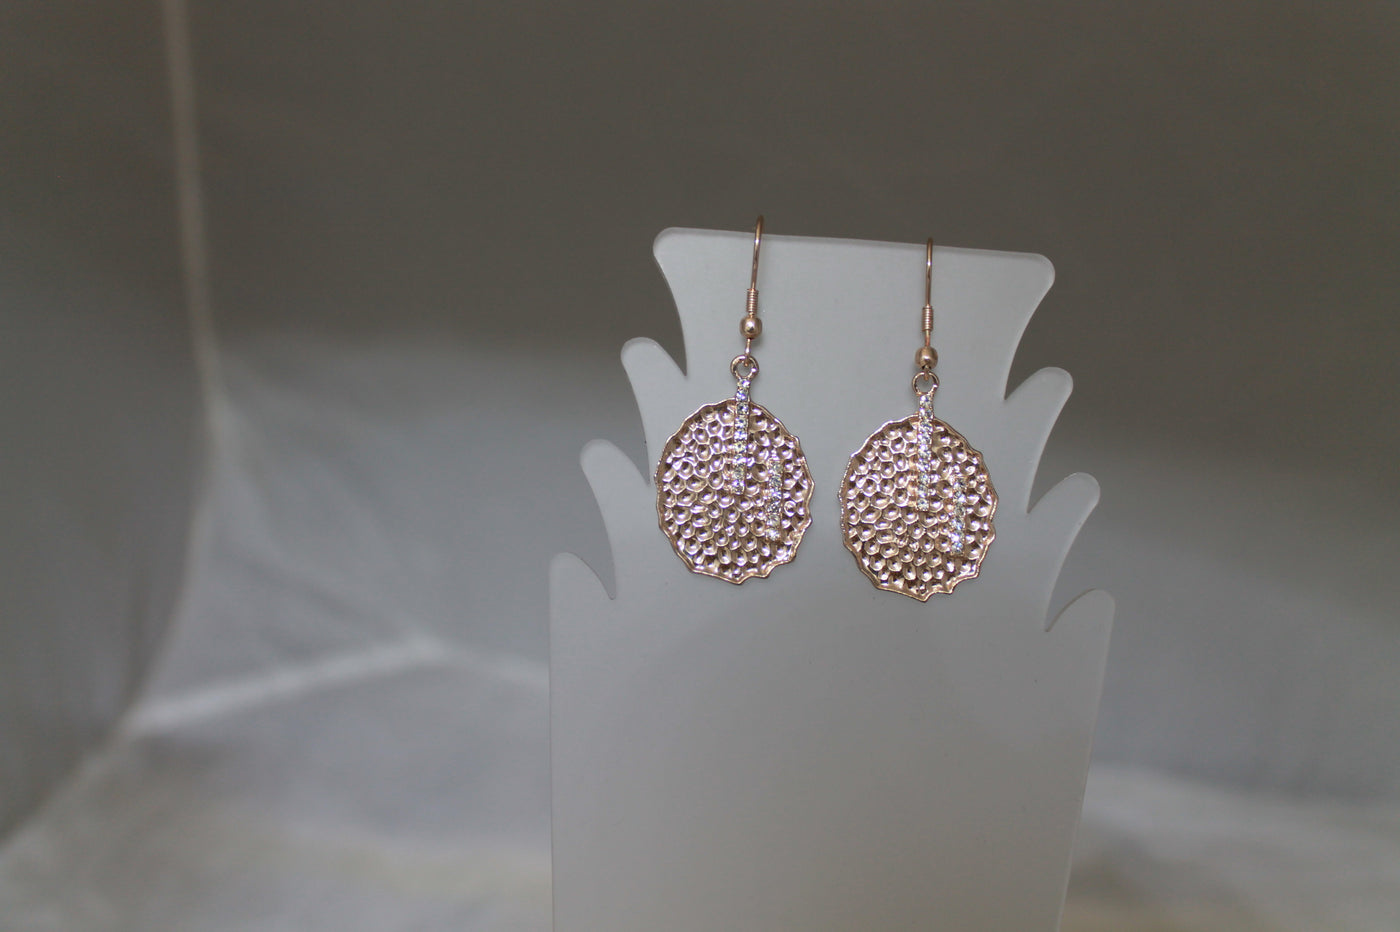 Hammered Disk Dangling Earrings with Linear Crystal Decoration